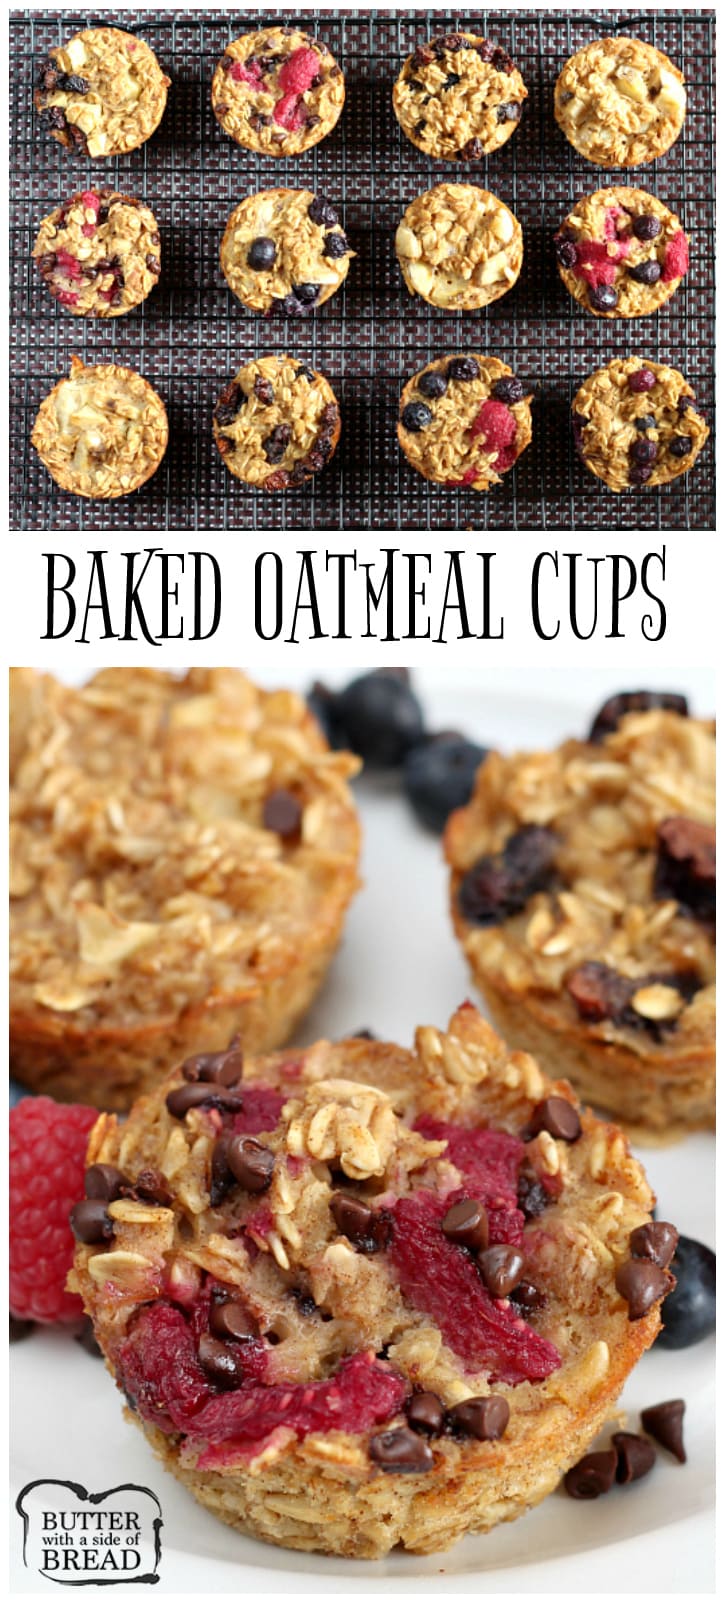 Easy Baked Oatmeal Cups are perfectly portioned and customizable so that everyone in the family can enjoy a quick and healthy breakfast! This baked oatmeal recipe can be enjoyed plain or you can add raspberries, blueberries, chocolate chips, raisins or any other type of topping that you enjoy with oatmeal!